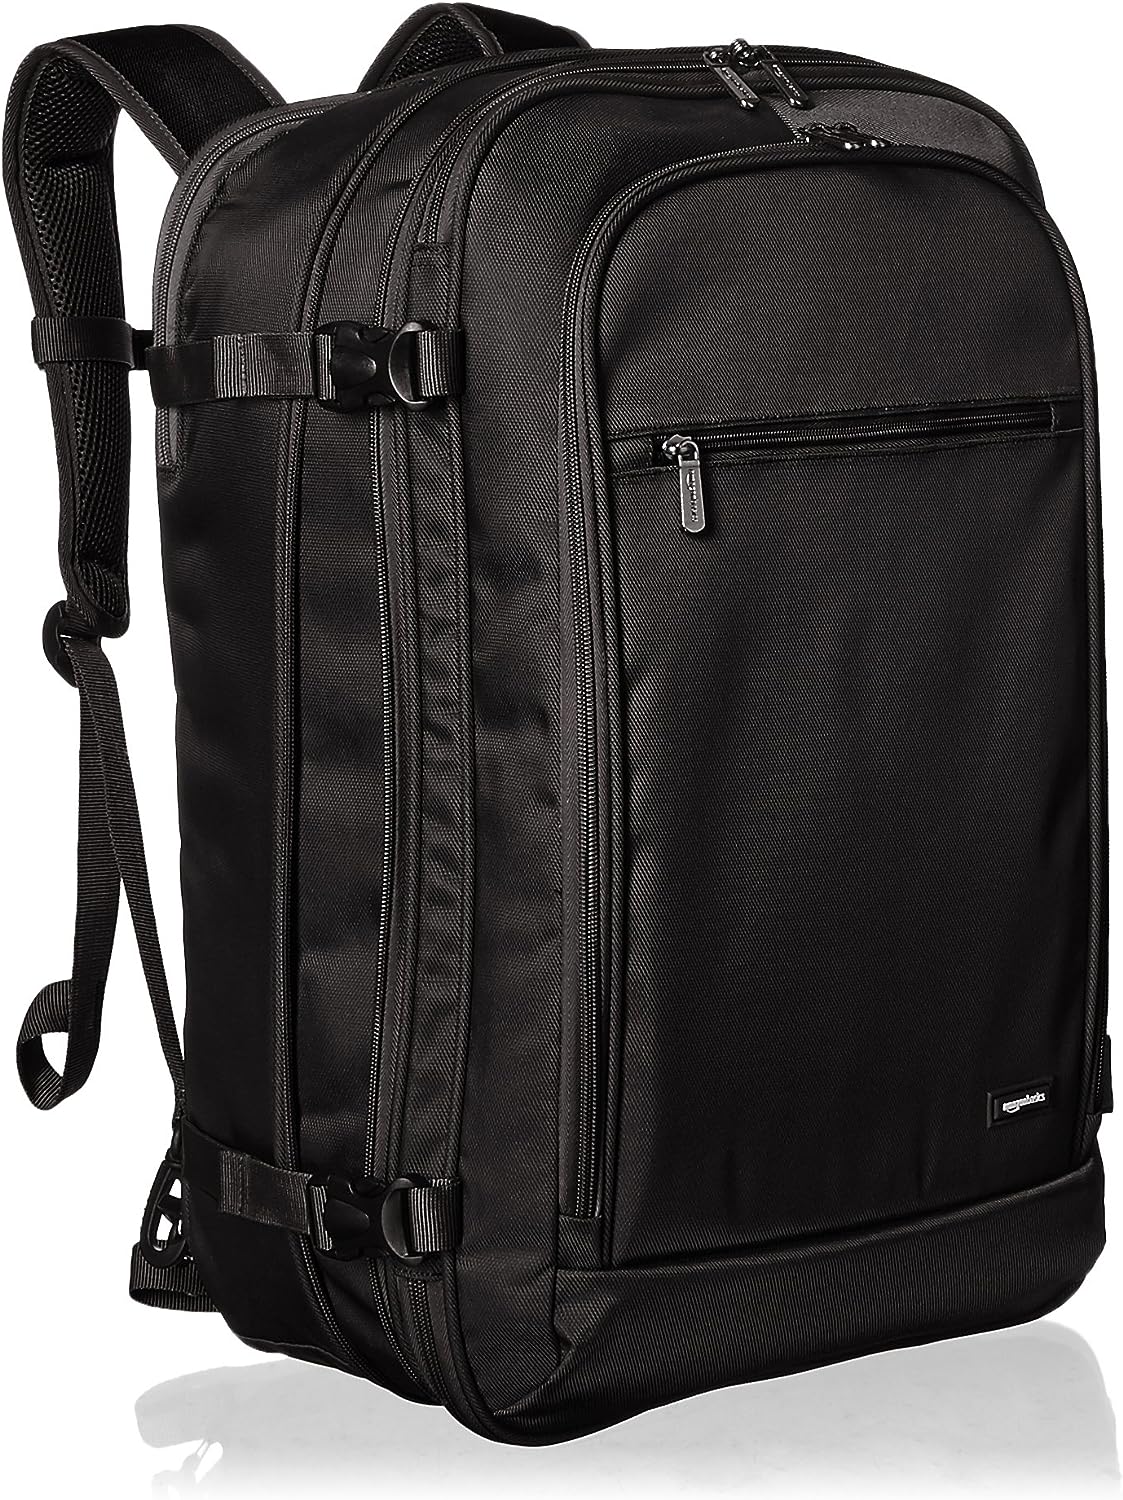 Amazon Basics Carry-On Travel Backpack - Black - pack in one day